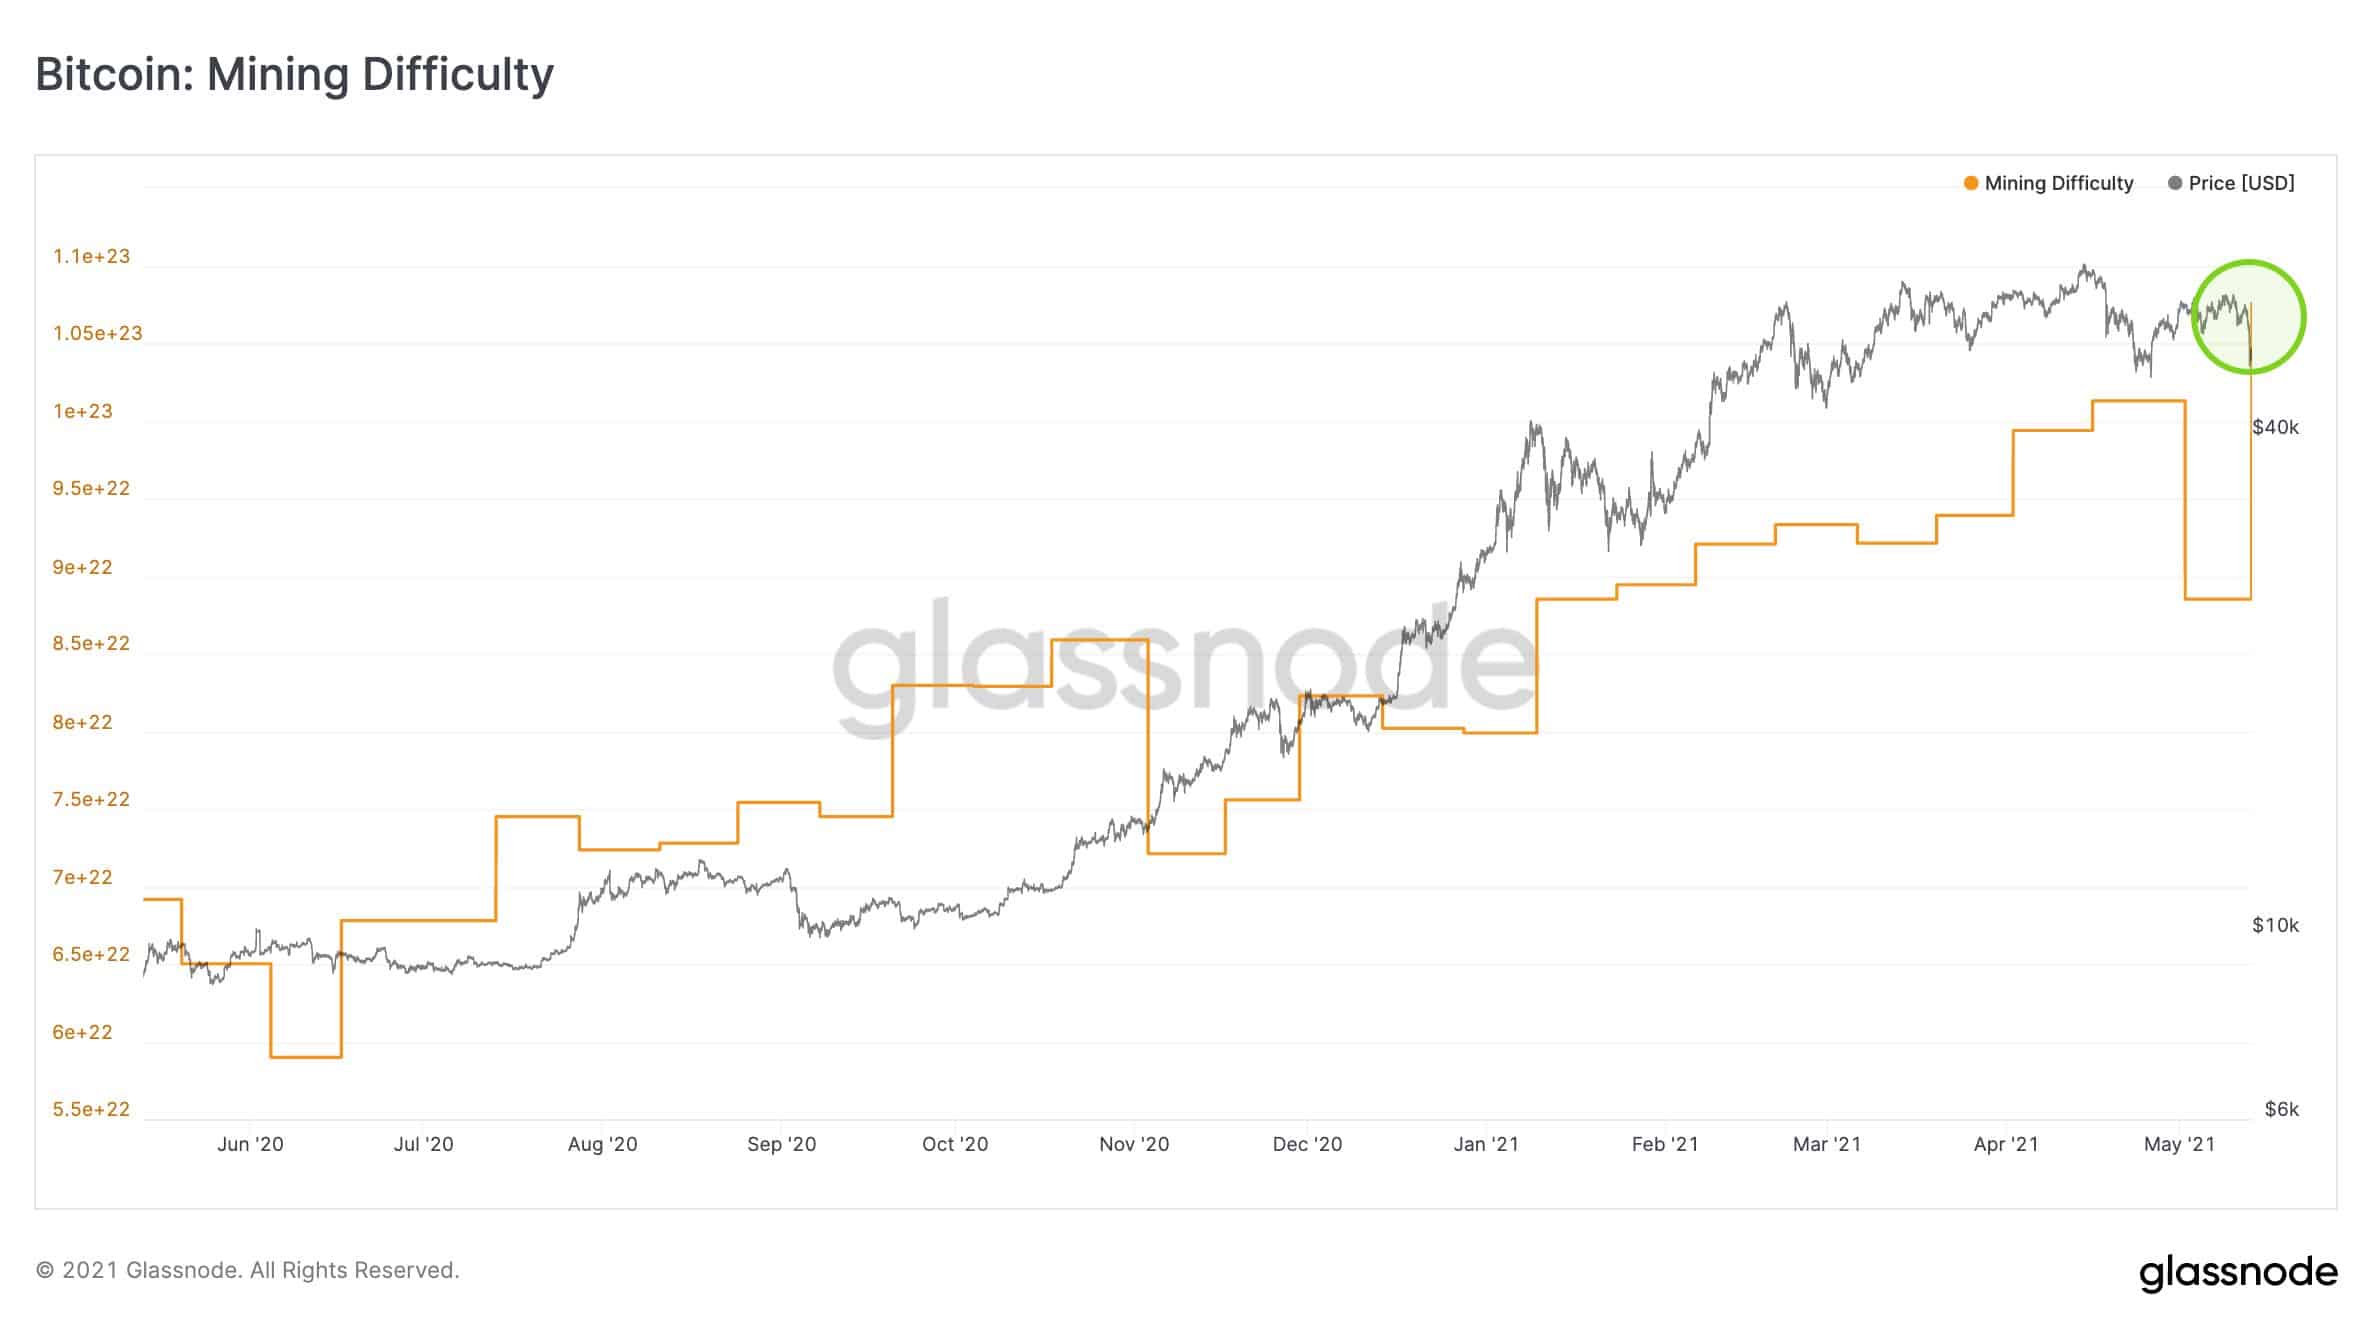 Bitcoin Mining Difficulty. Source: Glassnode